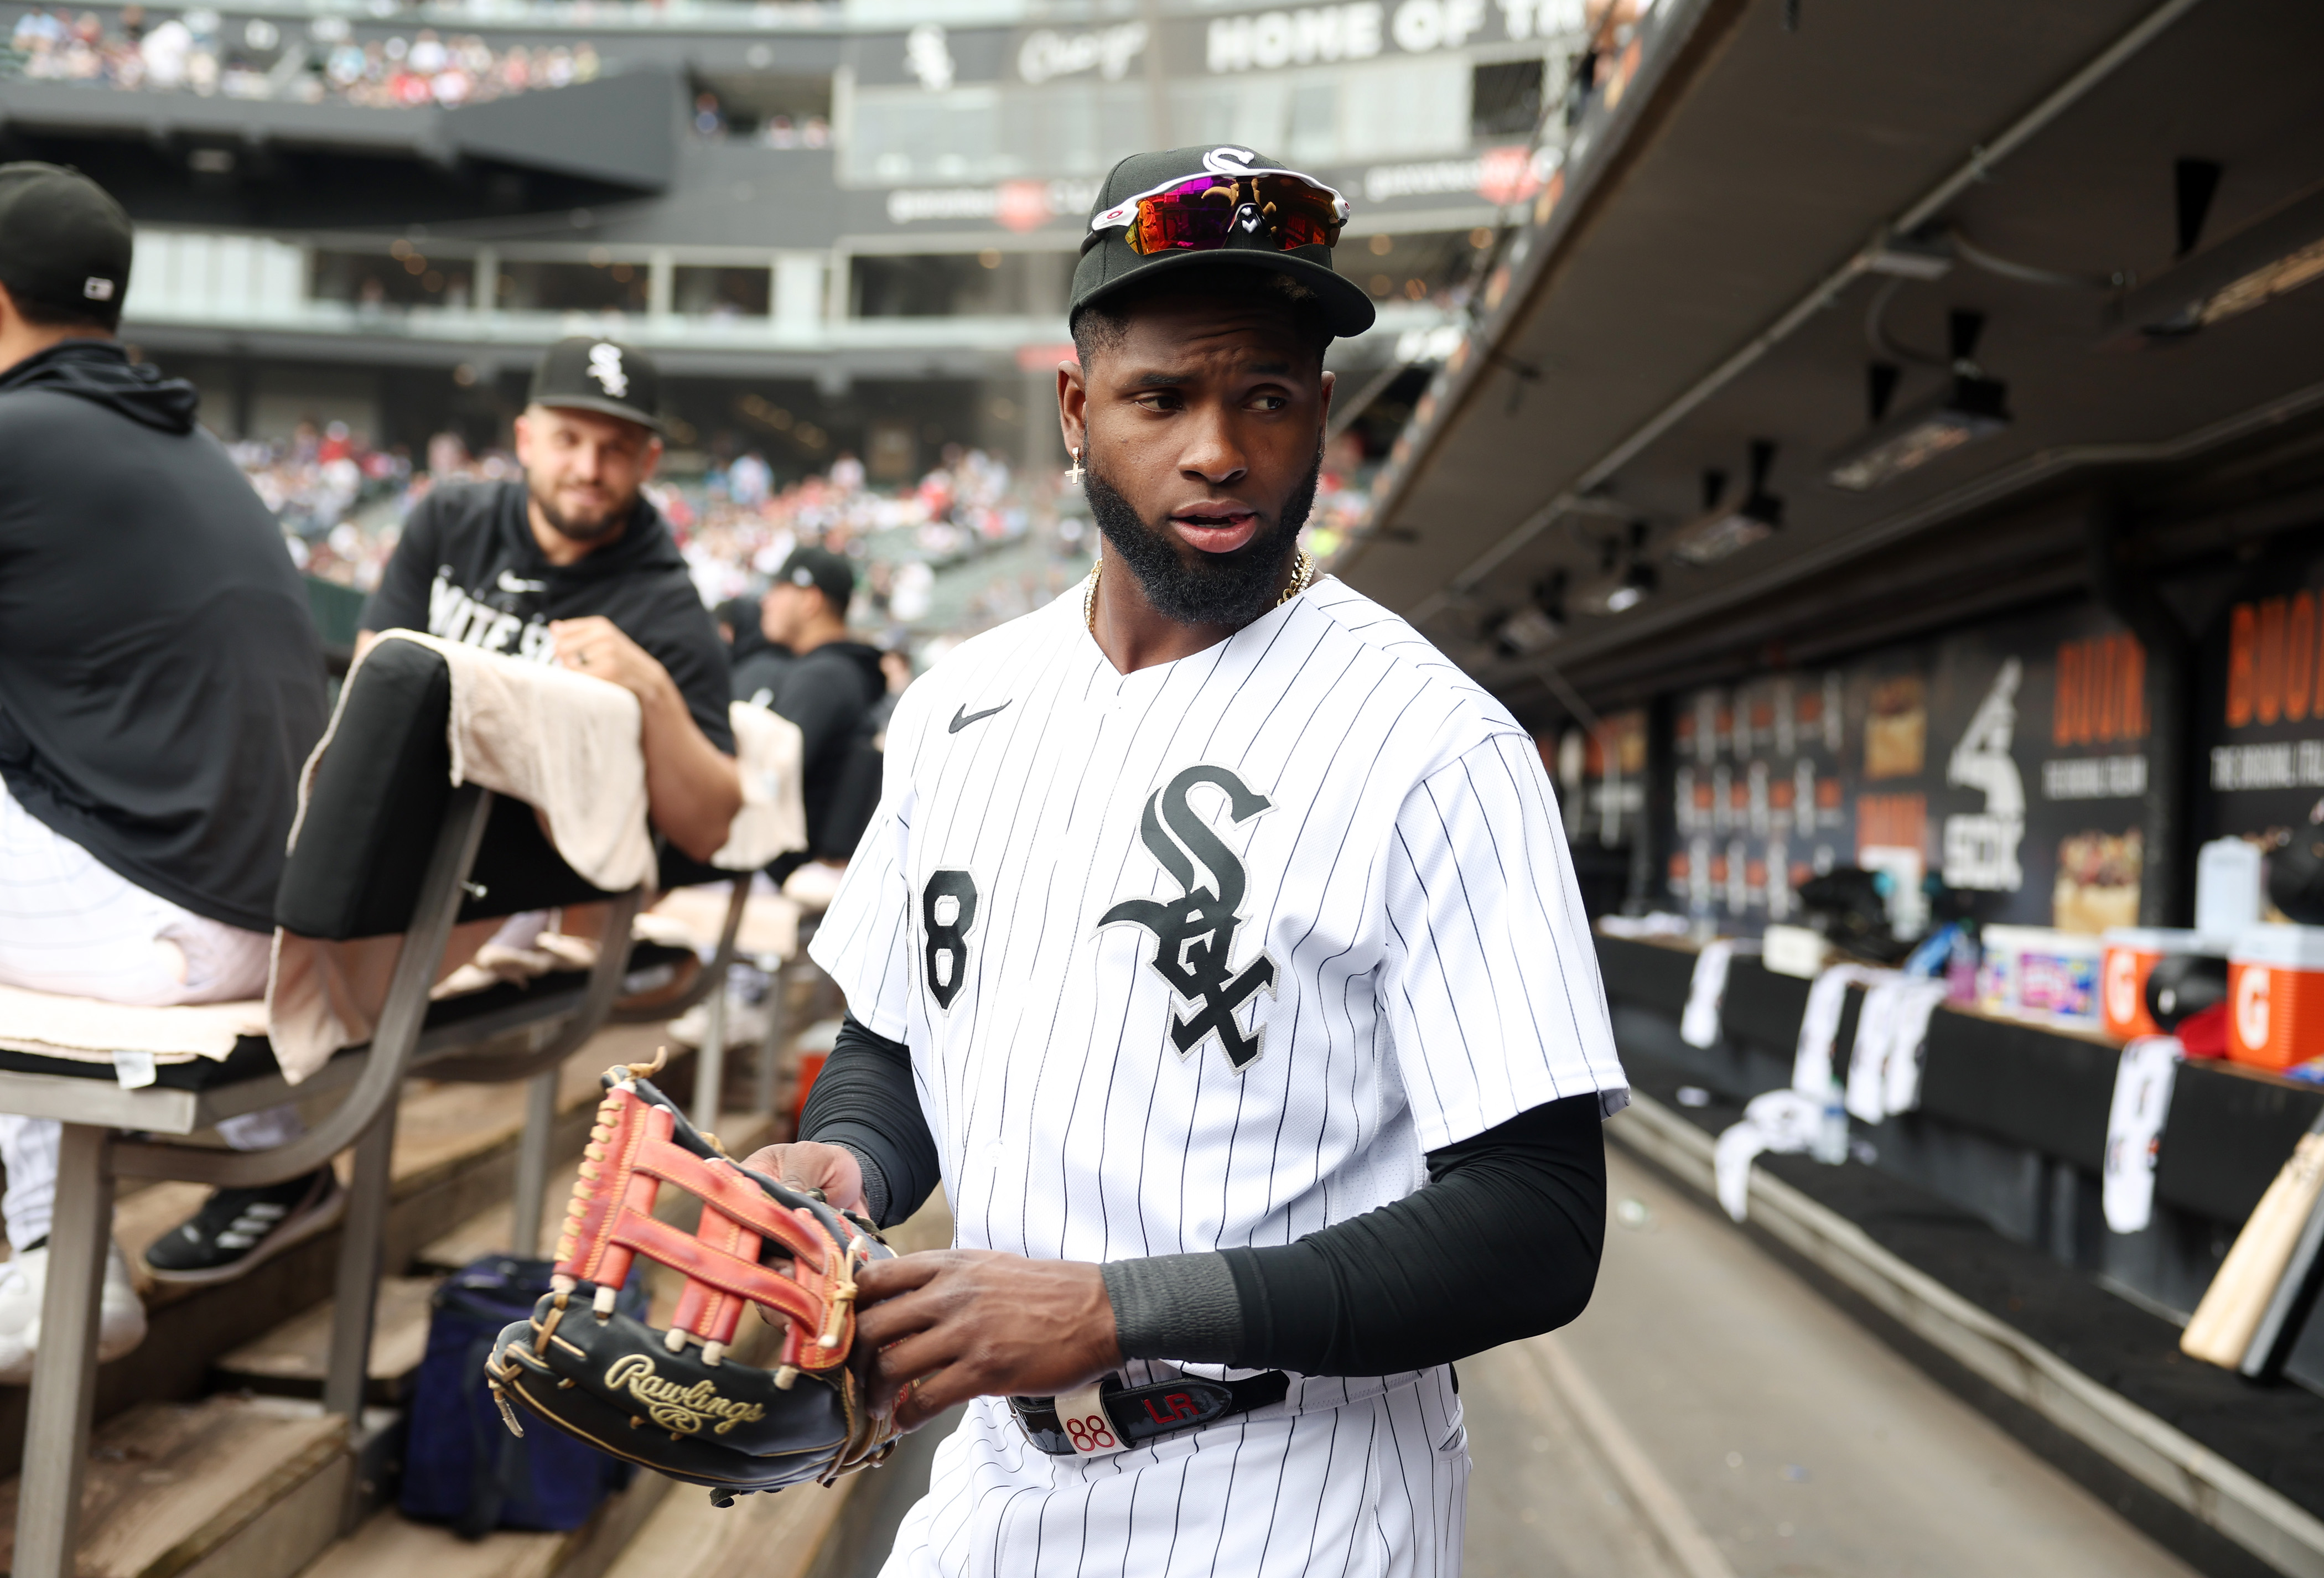 avin Sheets drives in 3 runs, White Sox pull within 1 of Royals – NBC  Sports Chicago